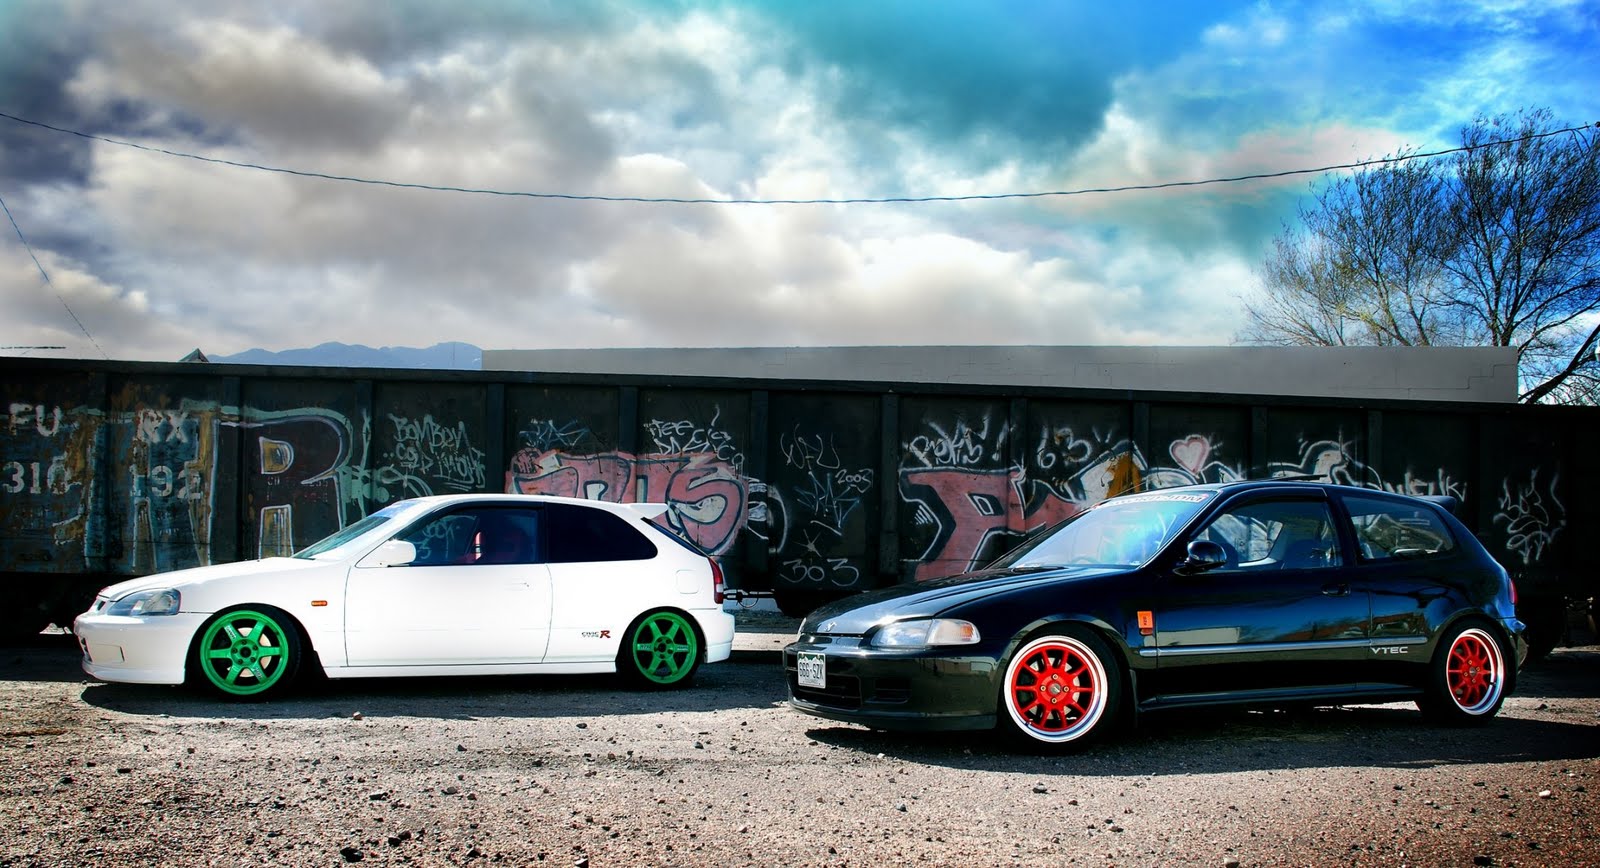 Highly Remend It To All Jdm Hot Hatch Fans Just Follow The Link